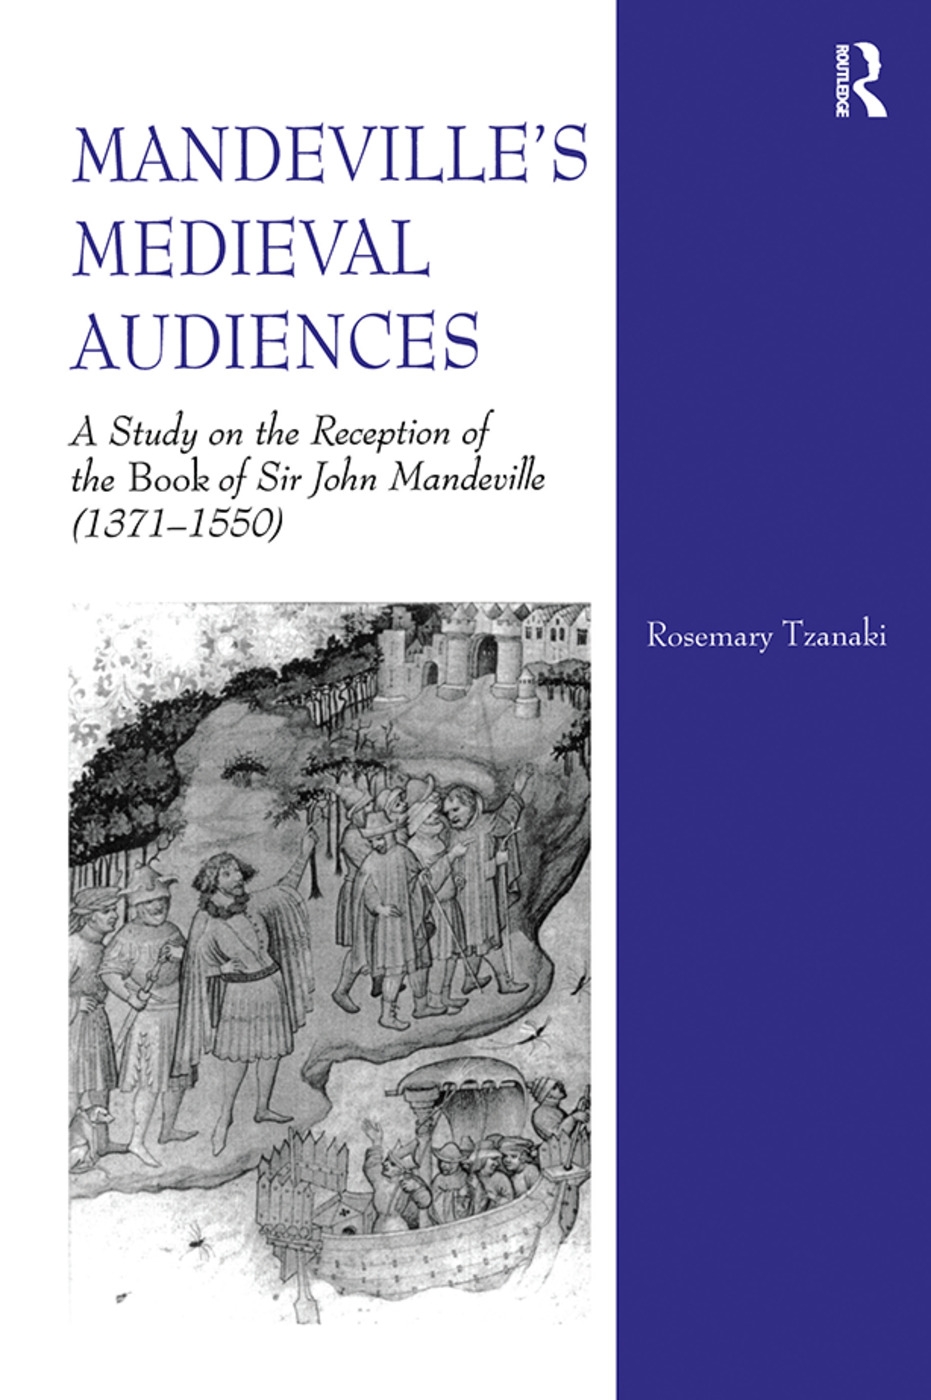 Mandeville’s Medieval Audiences: A Study on the Reception of the Book of Sir John Mandeville (1371-1550)